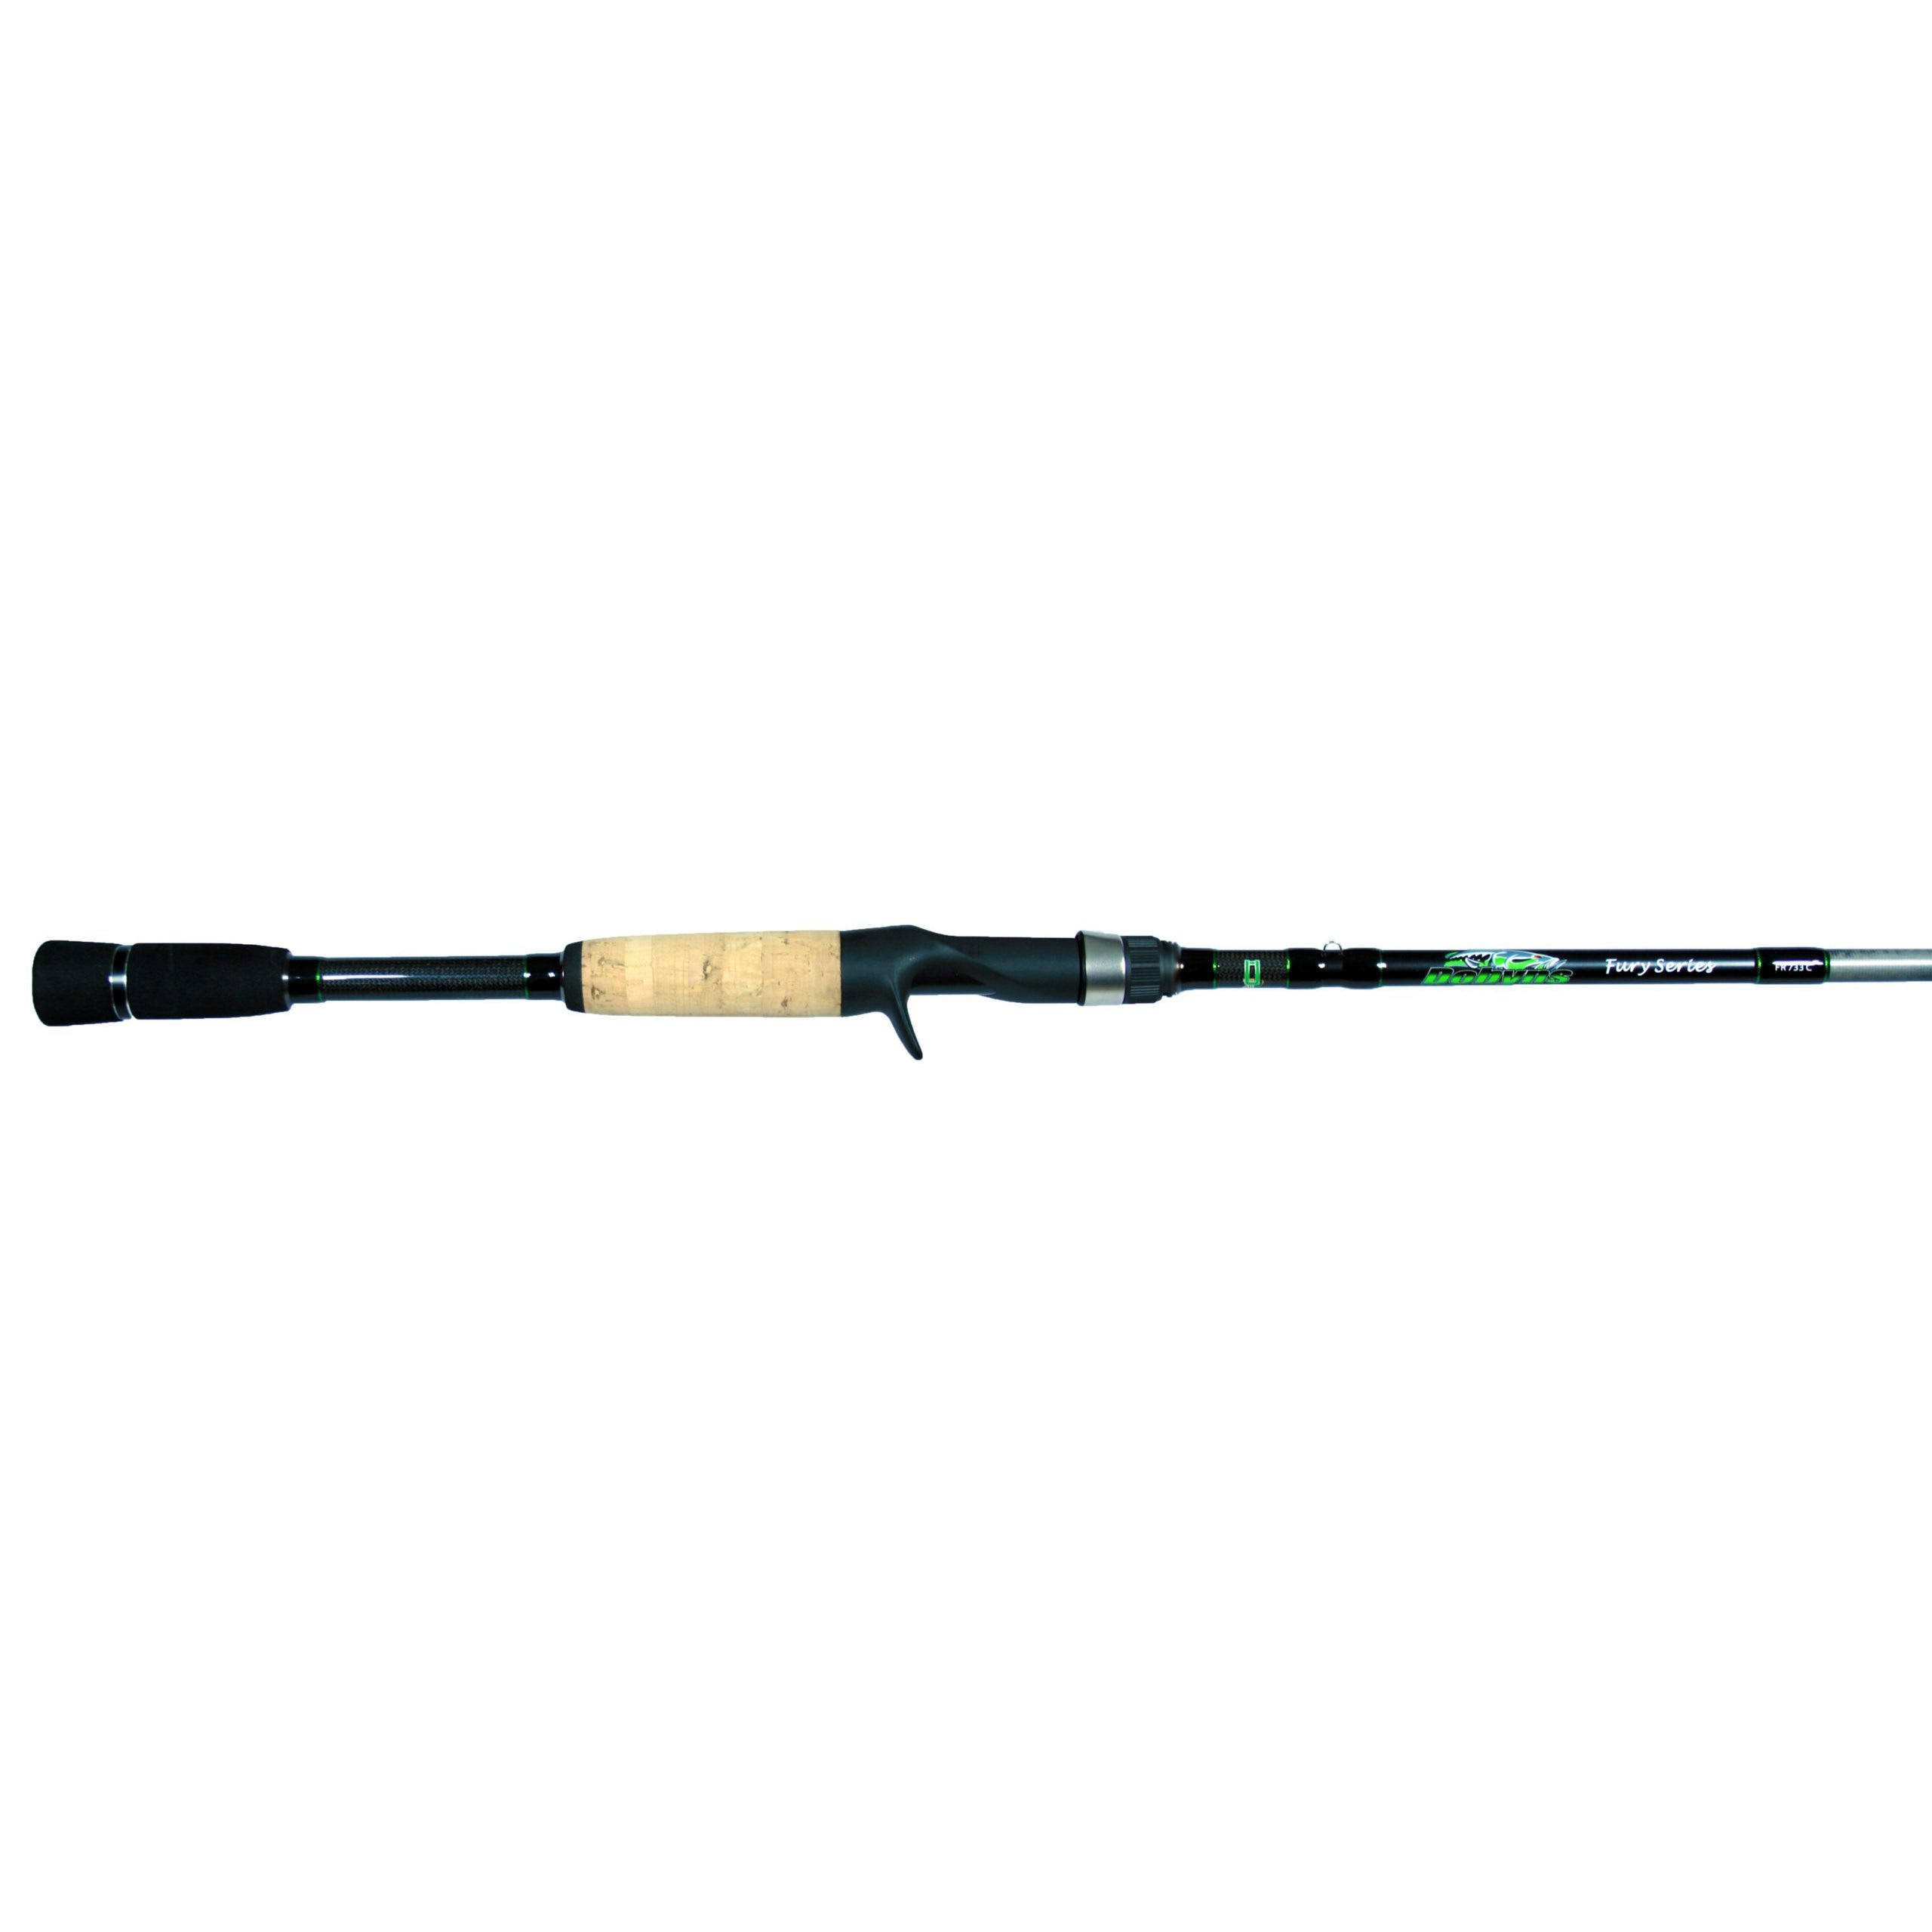 Dobyns Rods Fury Series 7’3” Casting Fishing Rod | FR735C | Mag Heavy Extreme Fast Action | Modulus Graphite Blank with Kevlar Wrapping | Fuji Reel